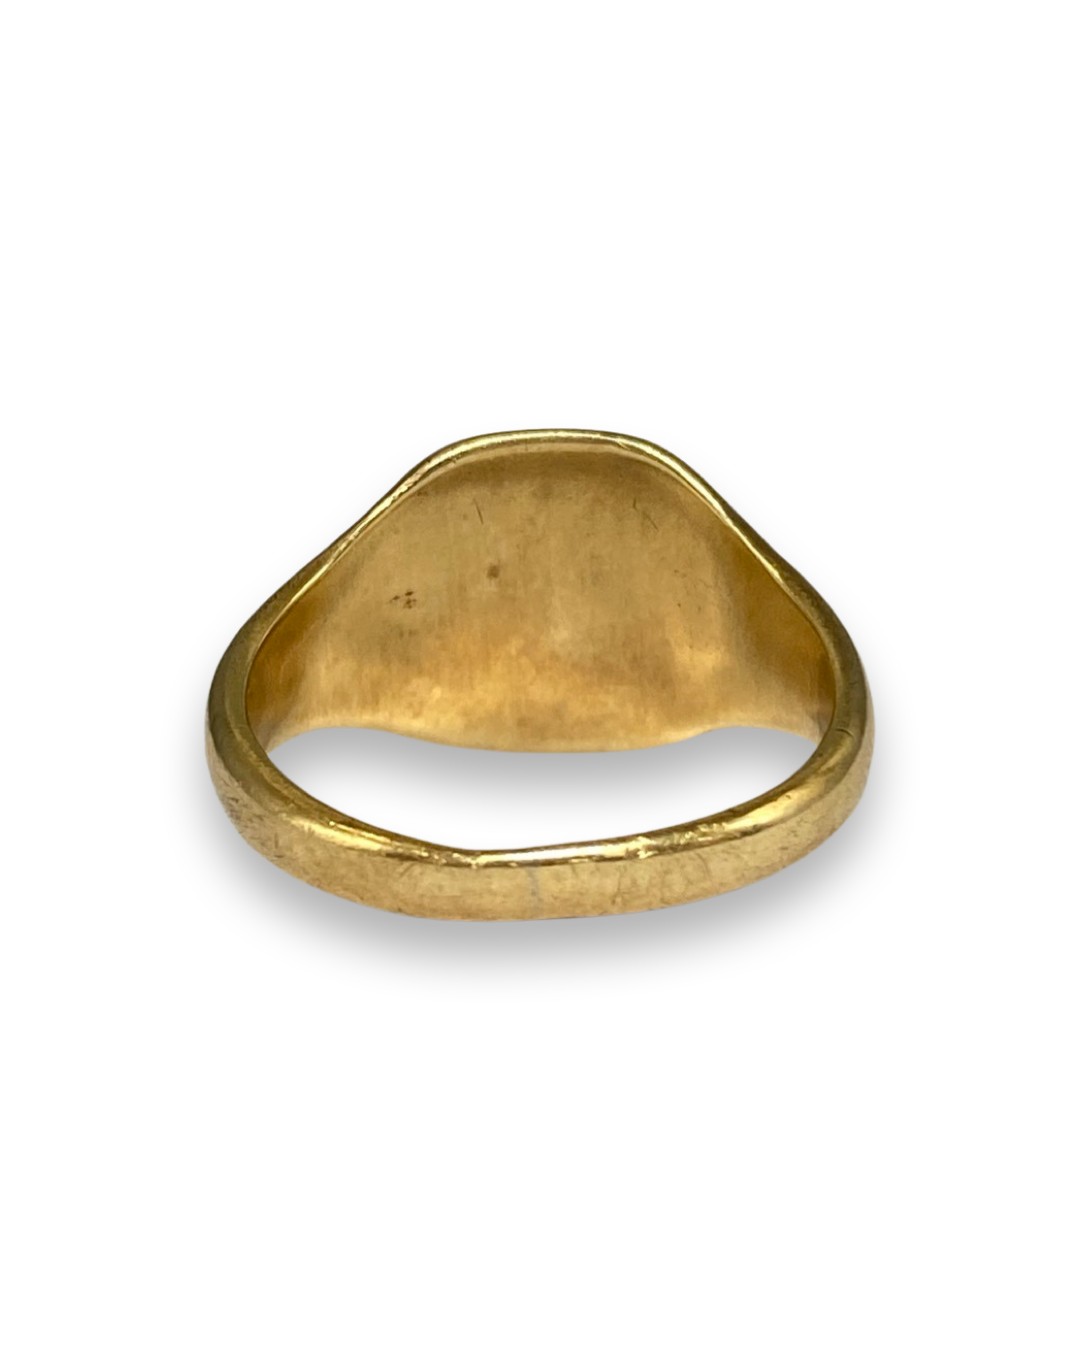 9ct Yellow Gold London 1960 Signet Ring weighing 6.07 grams size S - Image 2 of 3